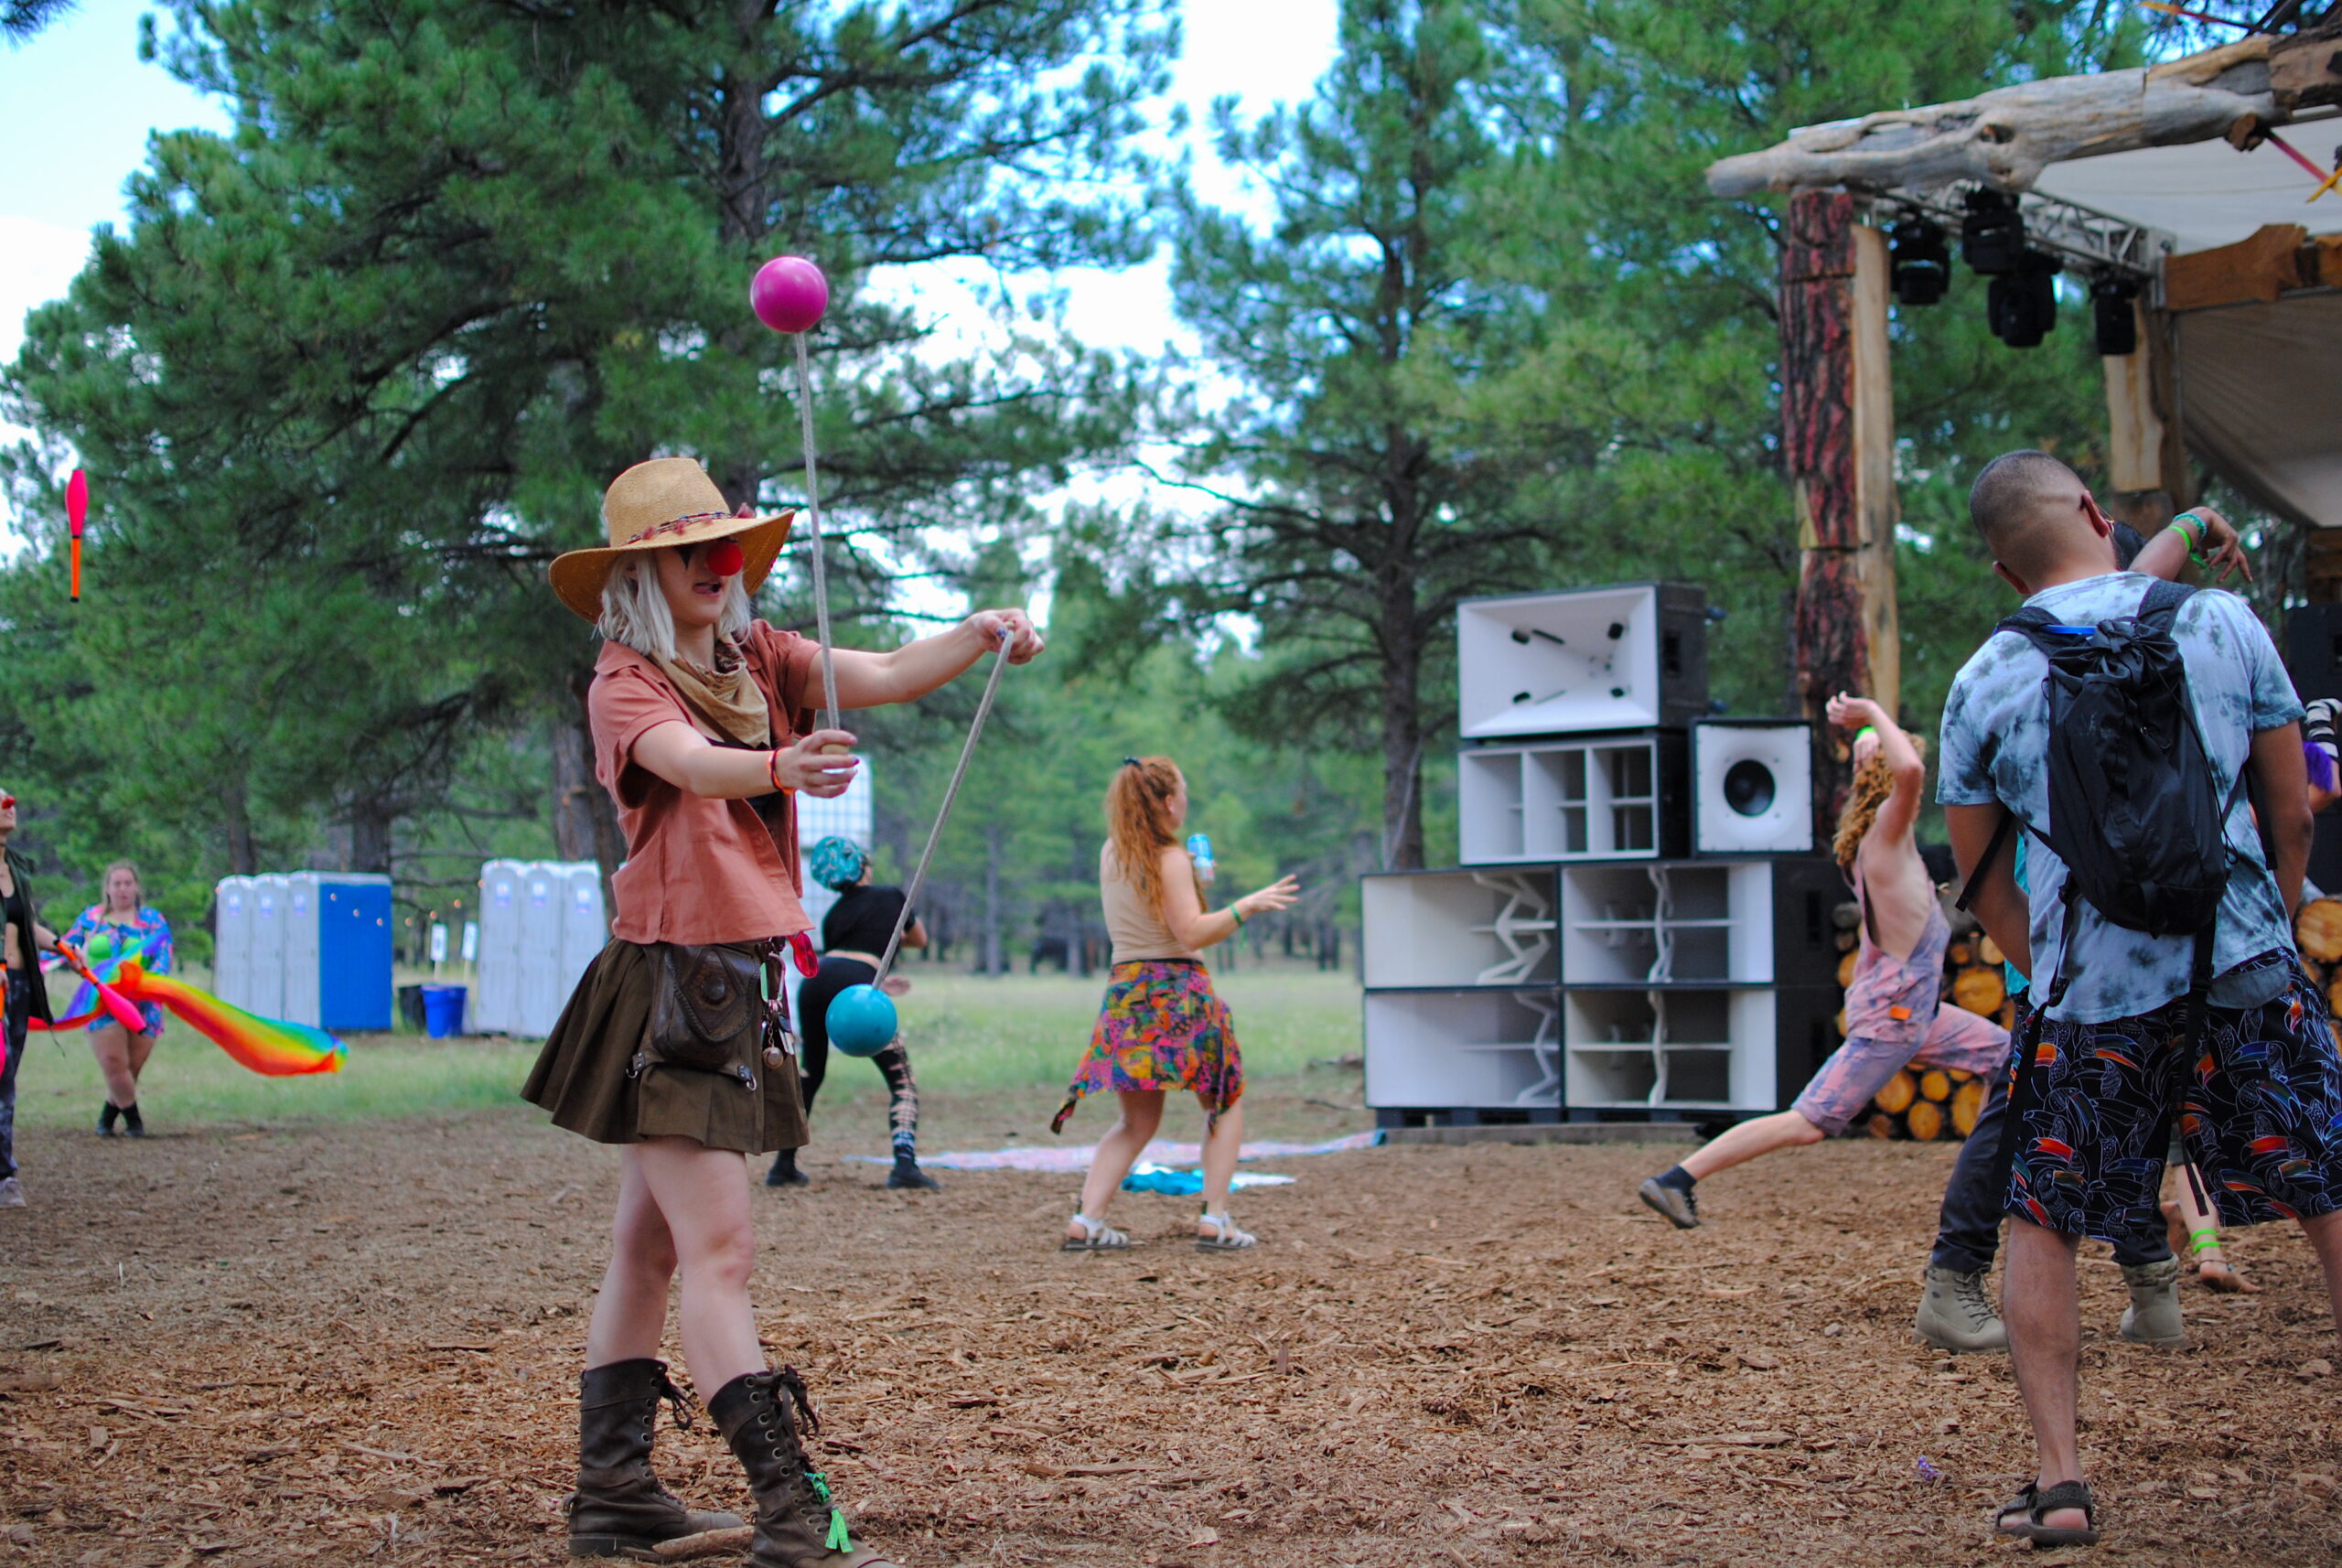 Festival-goers groove and flow among the Ponderosa Pines. Photo by: Marissa Novel.